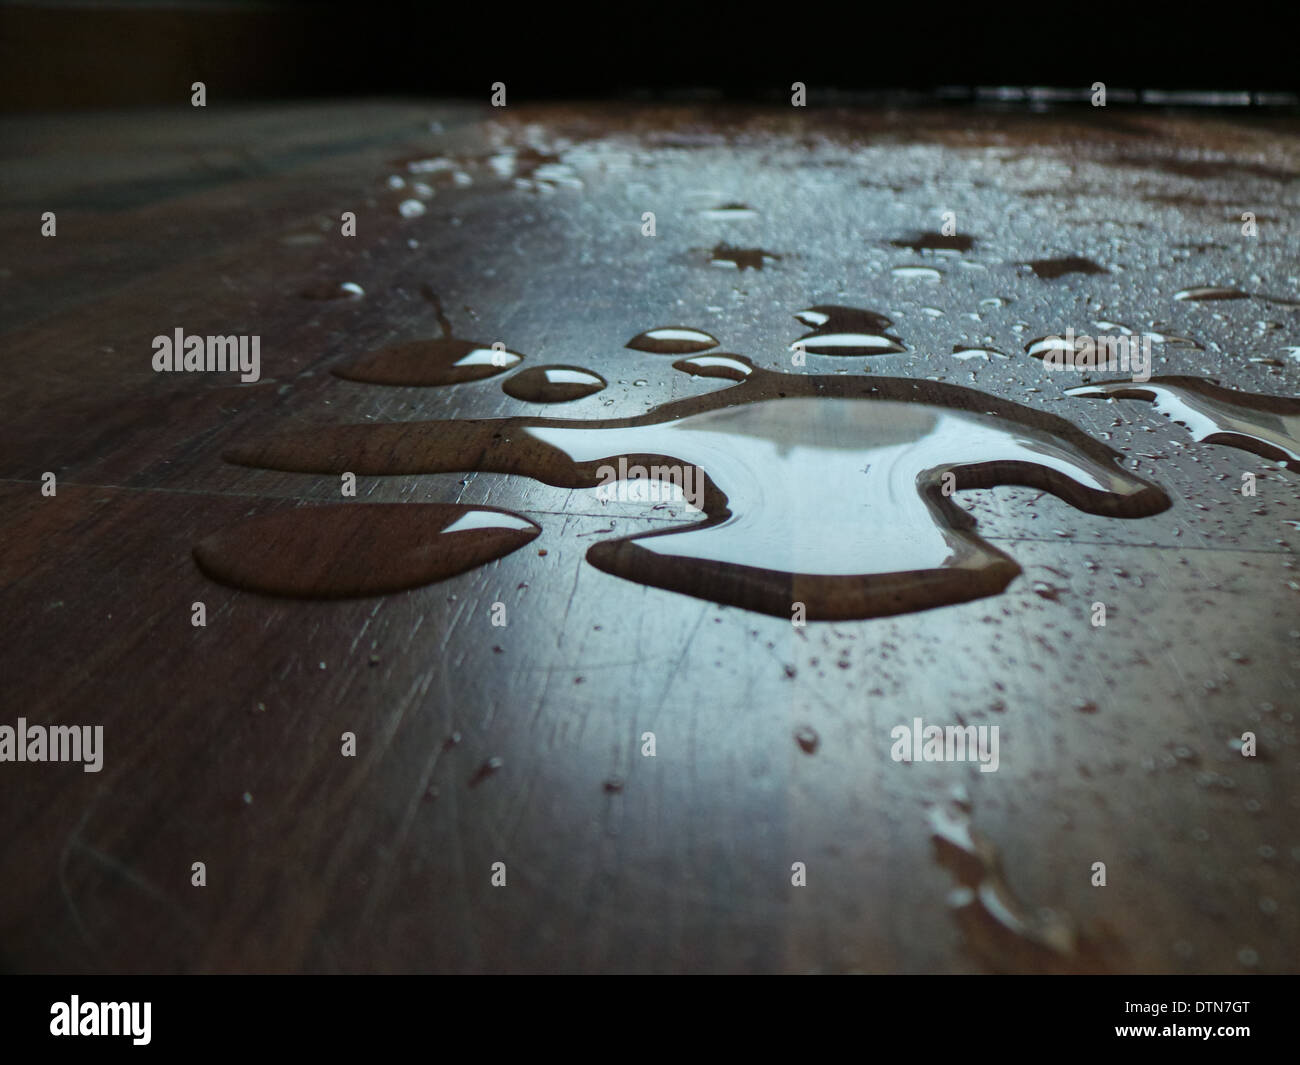 Water puddle on parquet floor Stock Photo